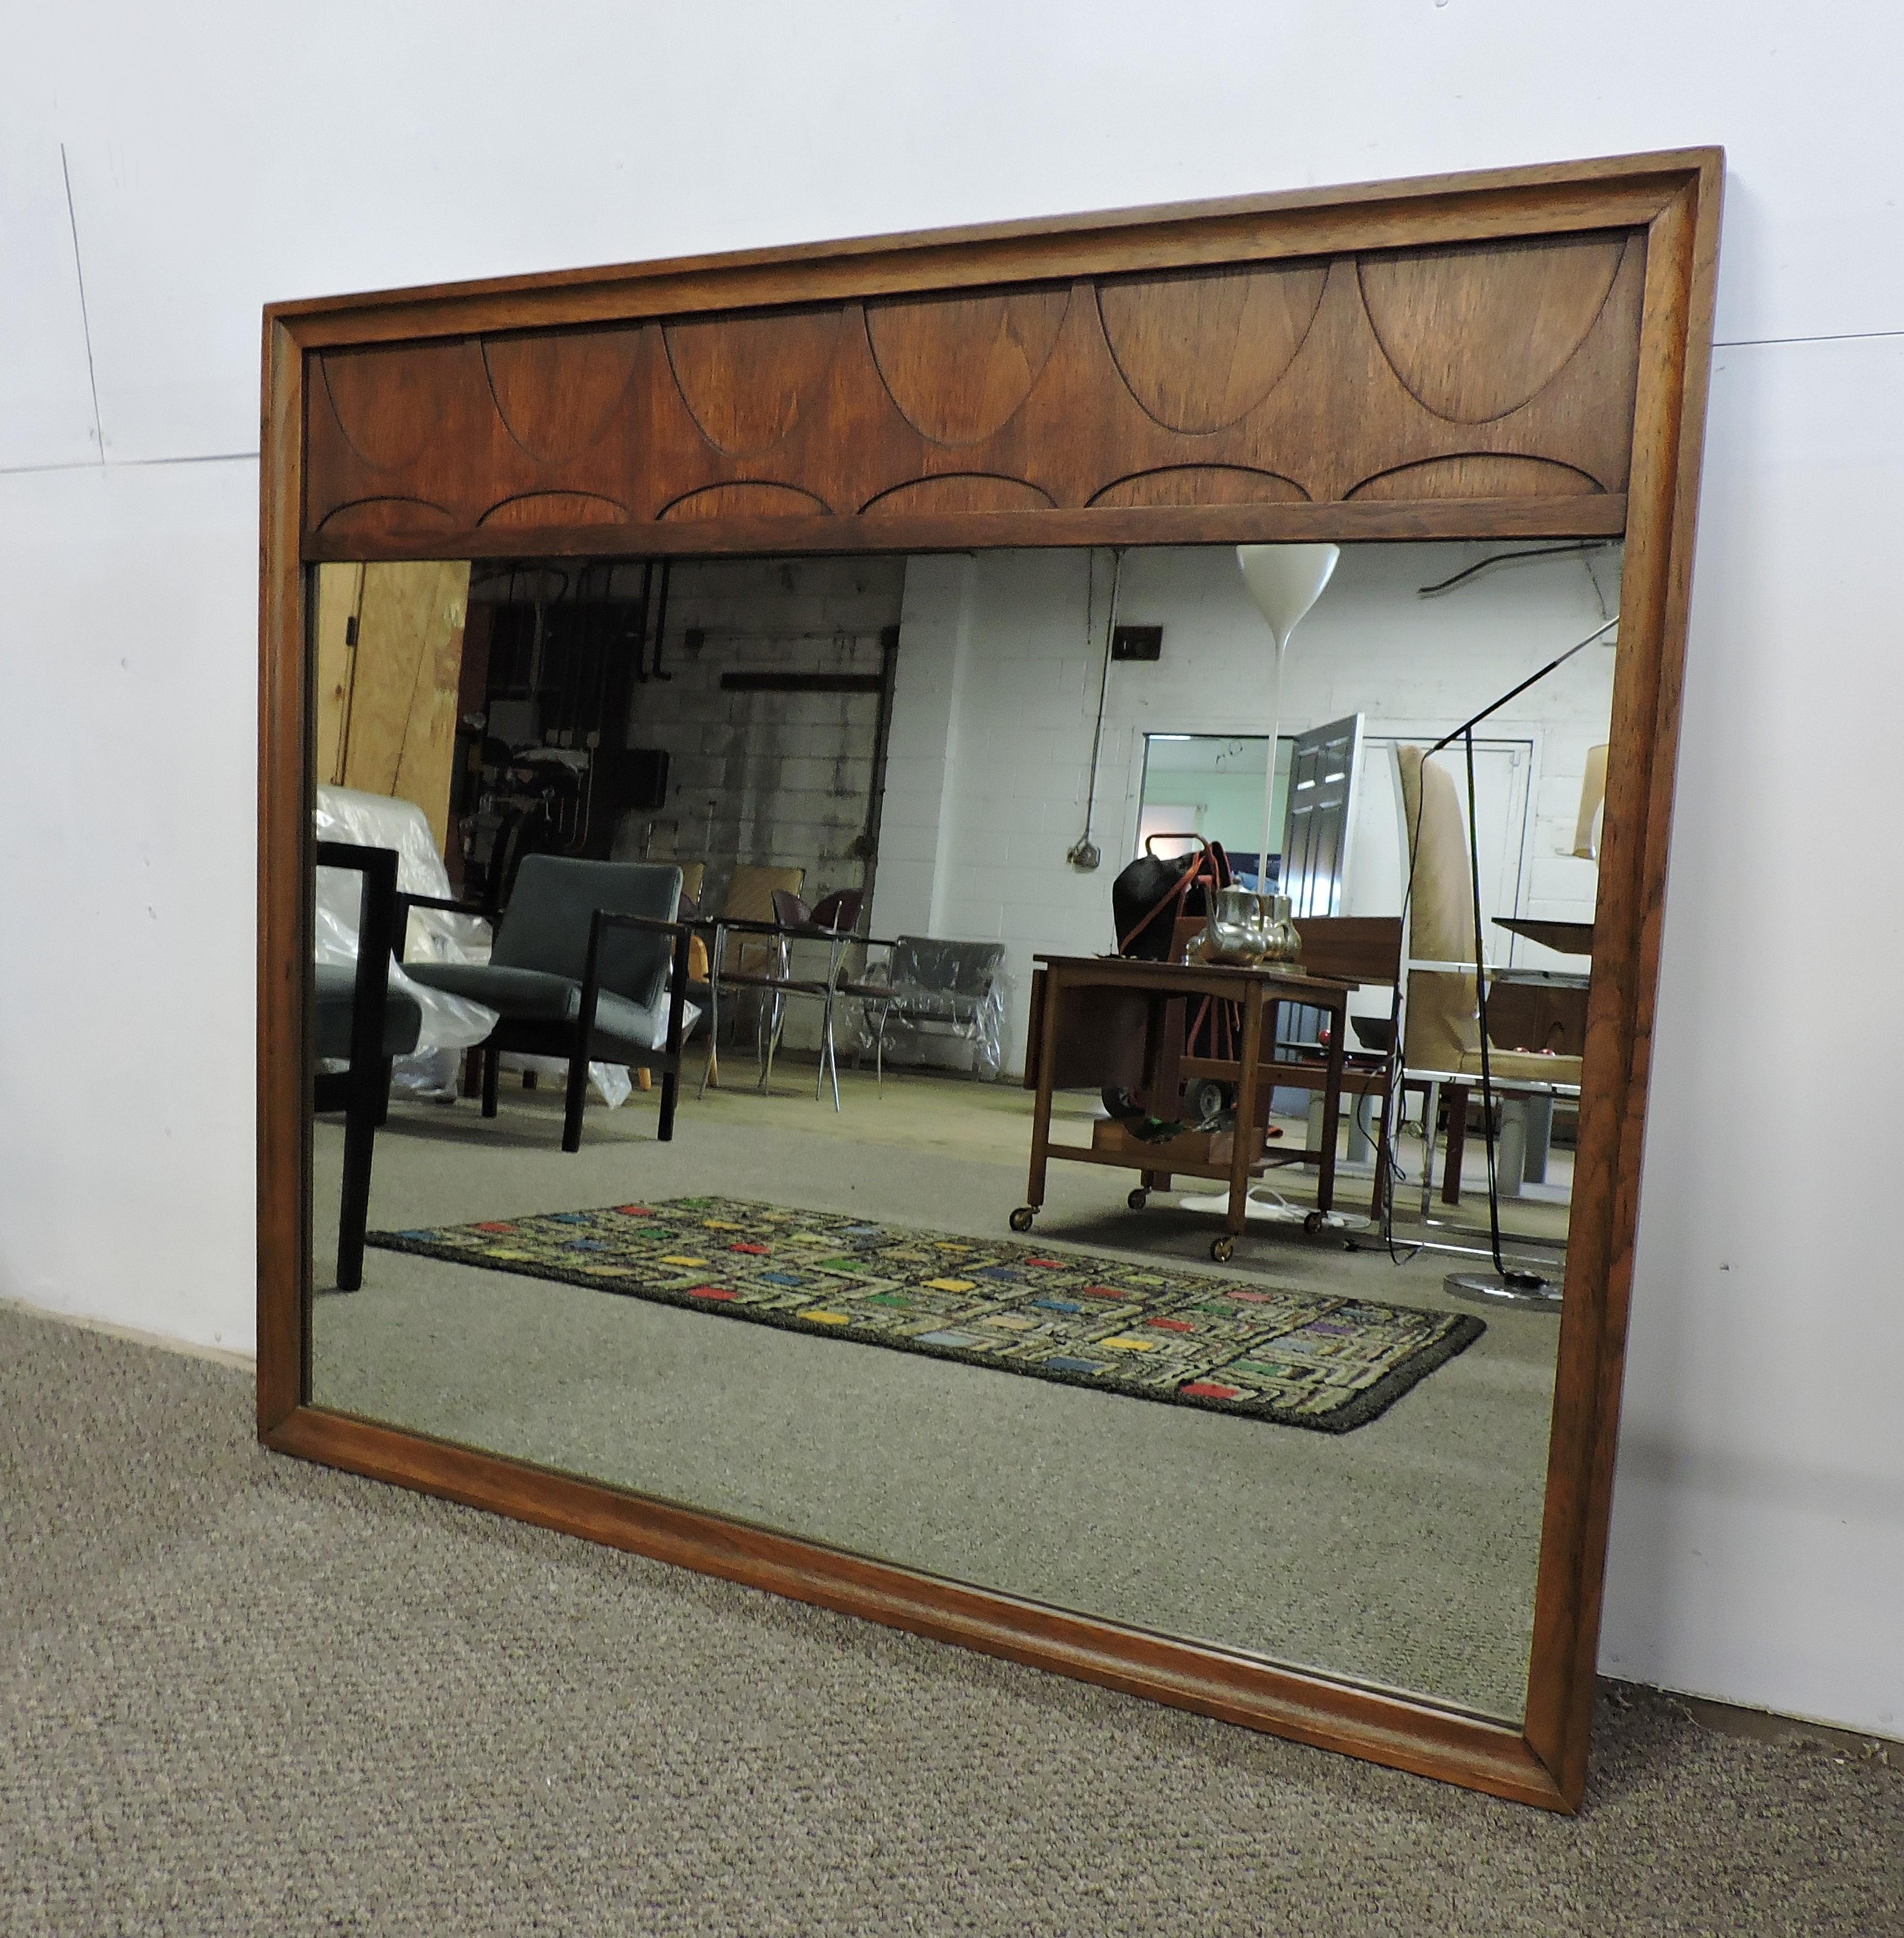 Distinctive large and substantial walnut mirror which was part of Broyhill's Brasilia line that was inspired by Oscar Niemeyers Mid-Century Modern Brazilian architecture. This mirror has a walnut frame with arched details. Stamped on the back with